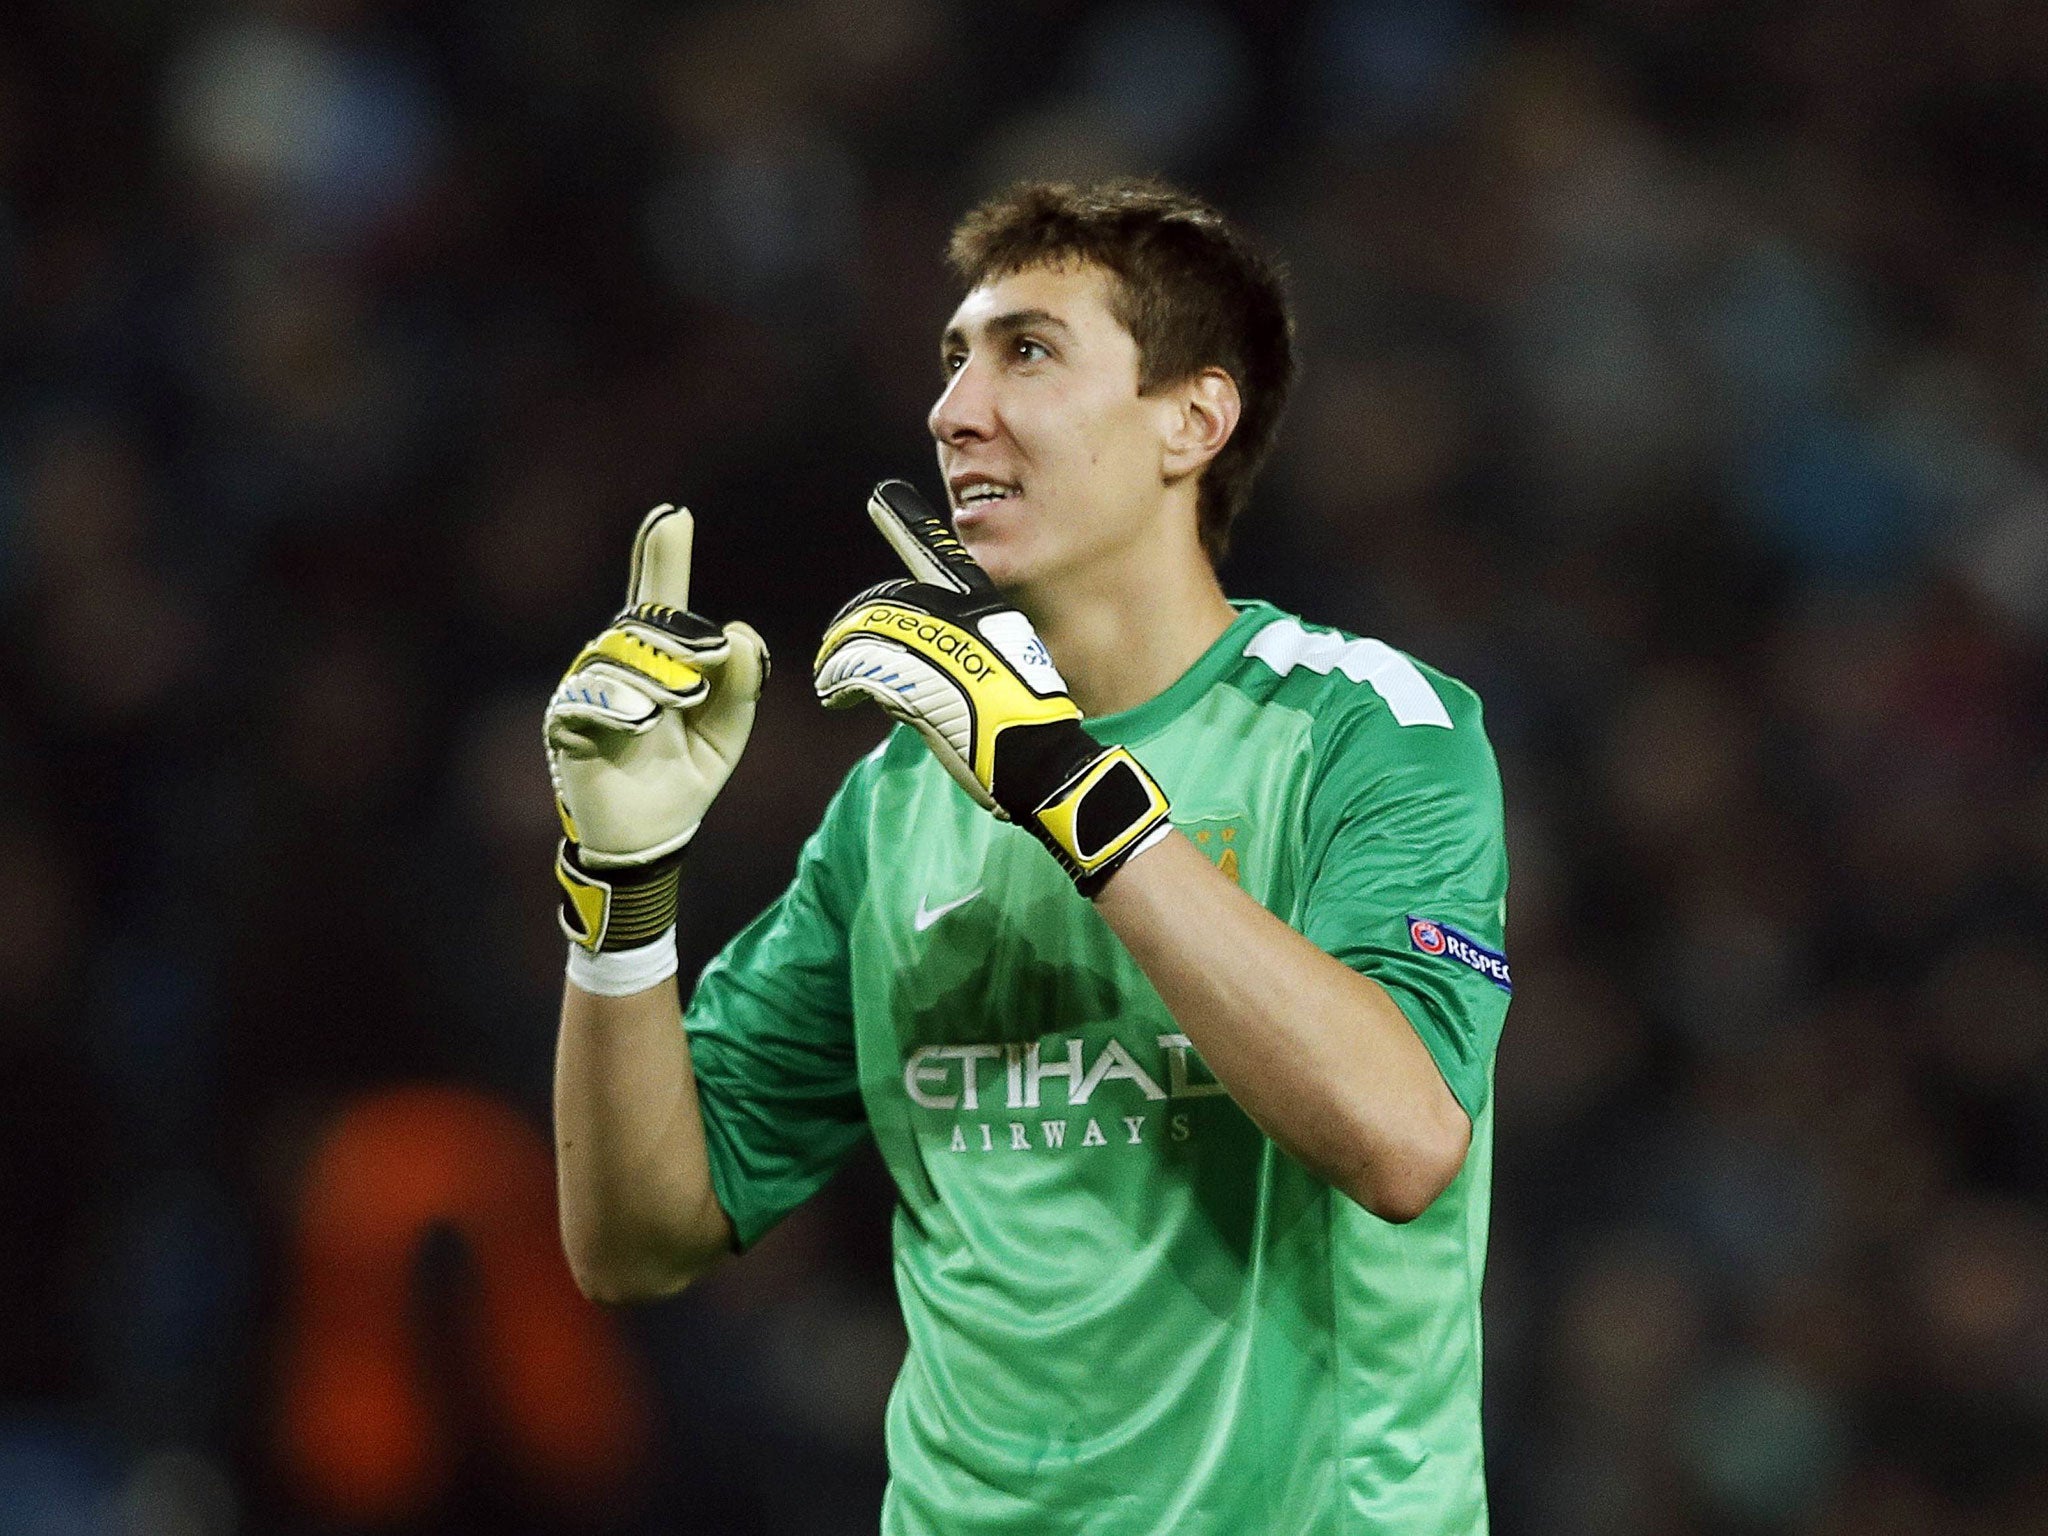 Costel Pantilimon is starting for City at Sunderland